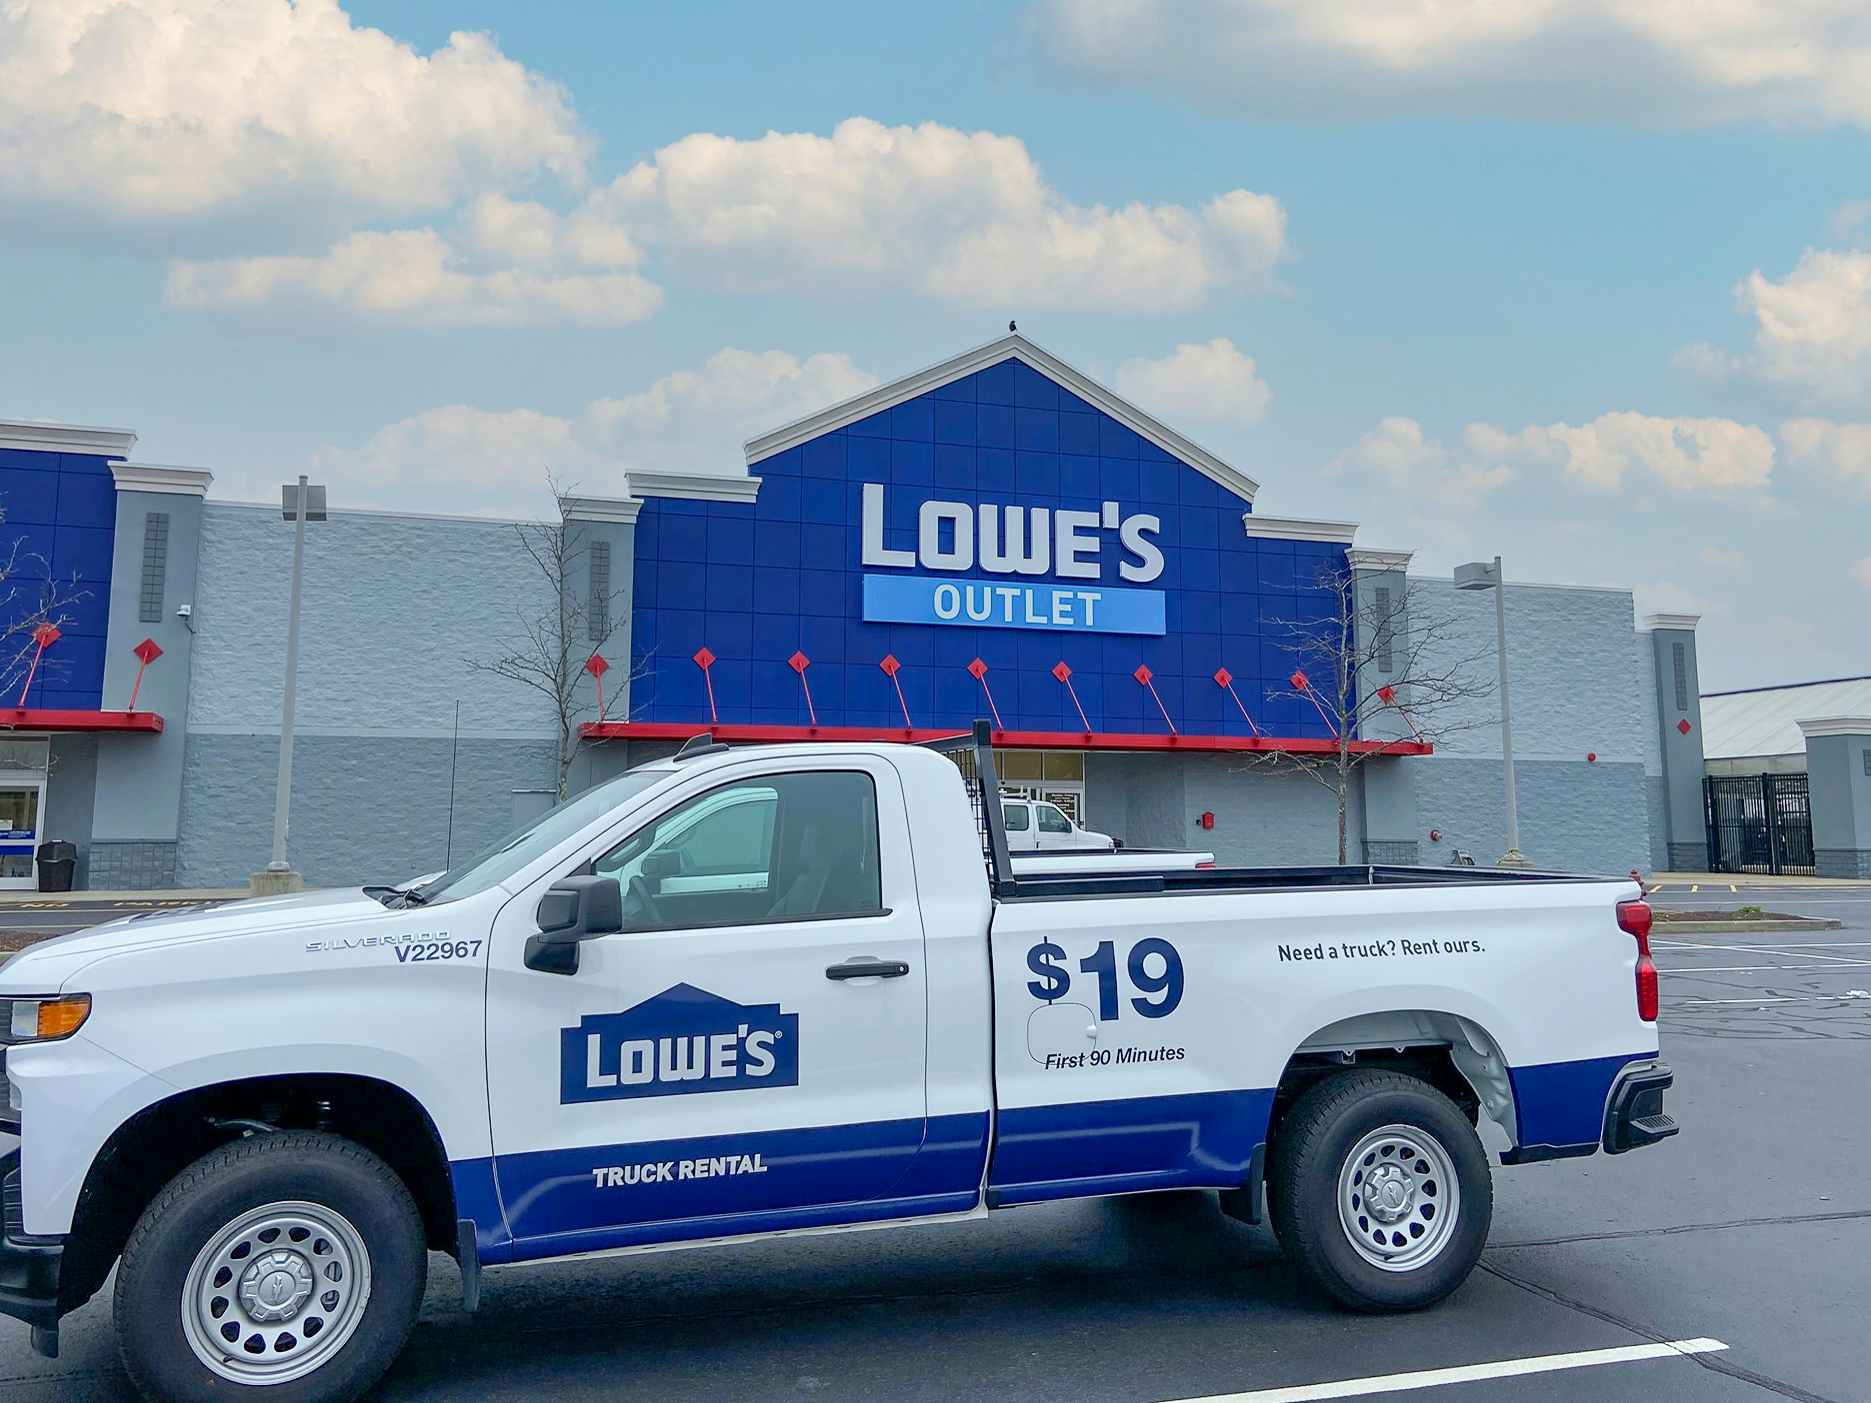 A Lowes Outlet store front with a rental truck parked in the parking lot